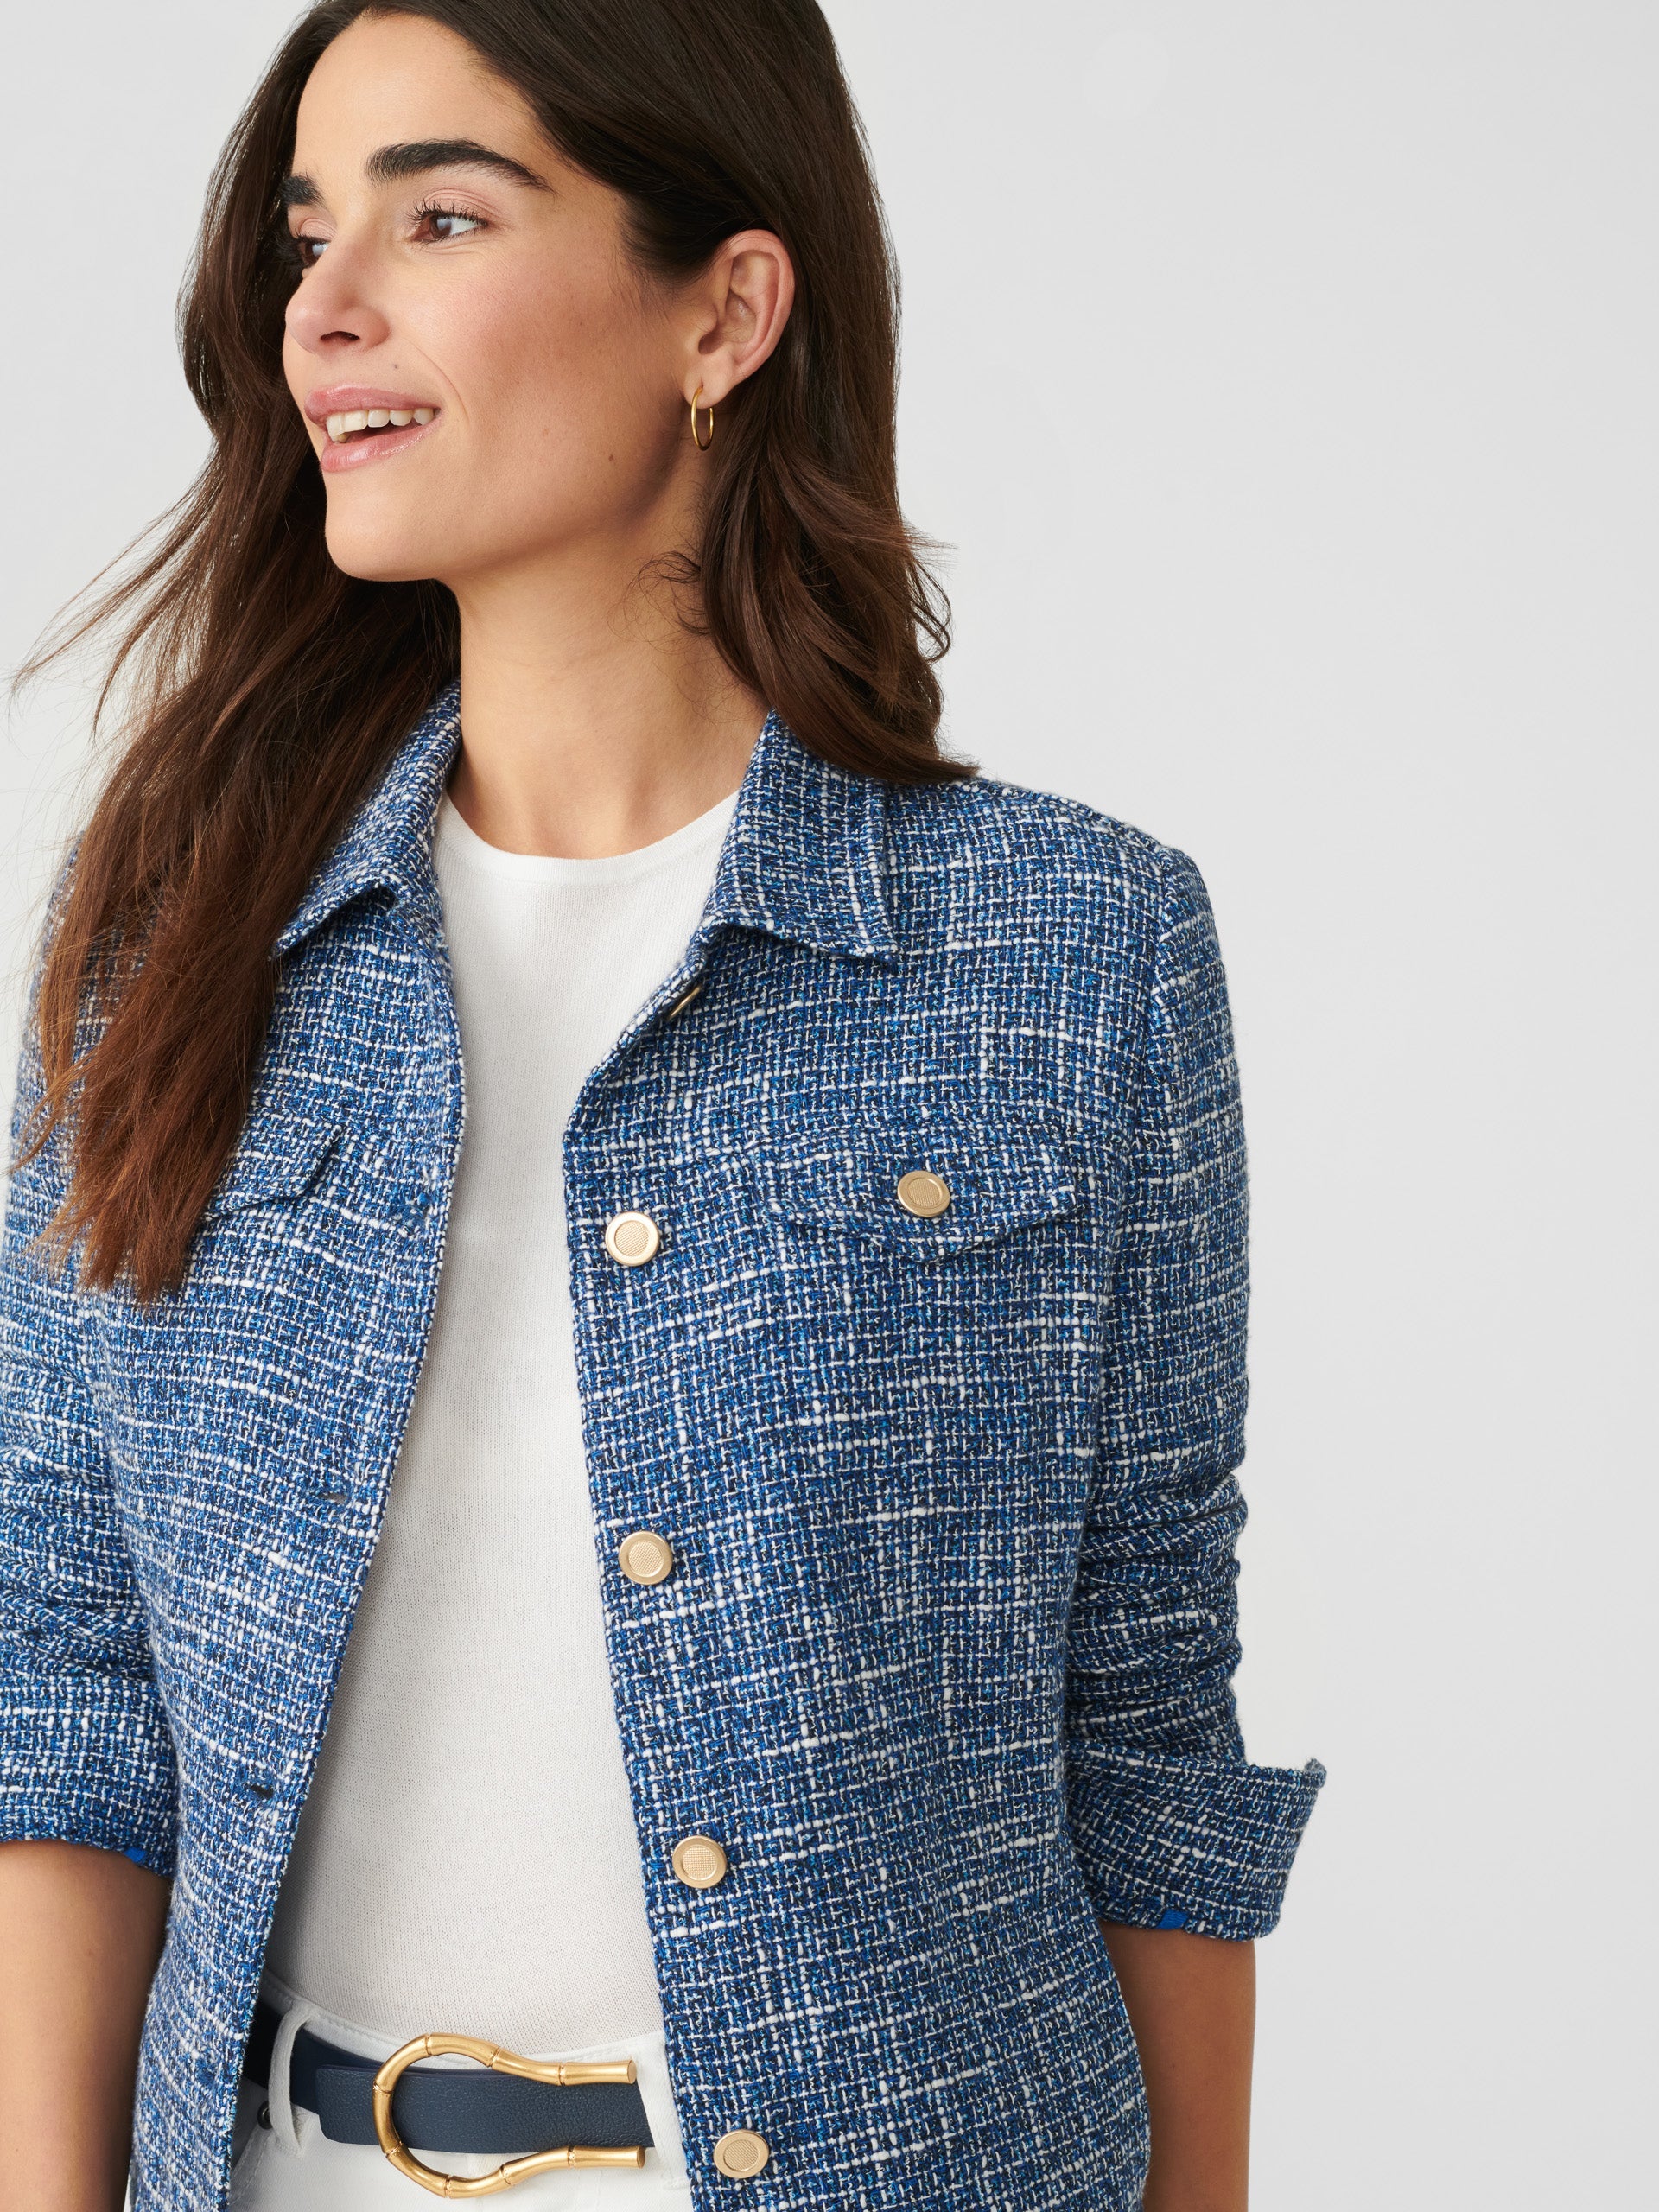 Model wears J.McLaughlin Colby Tweed Jacket in blue made with cotton/polyester/linen.